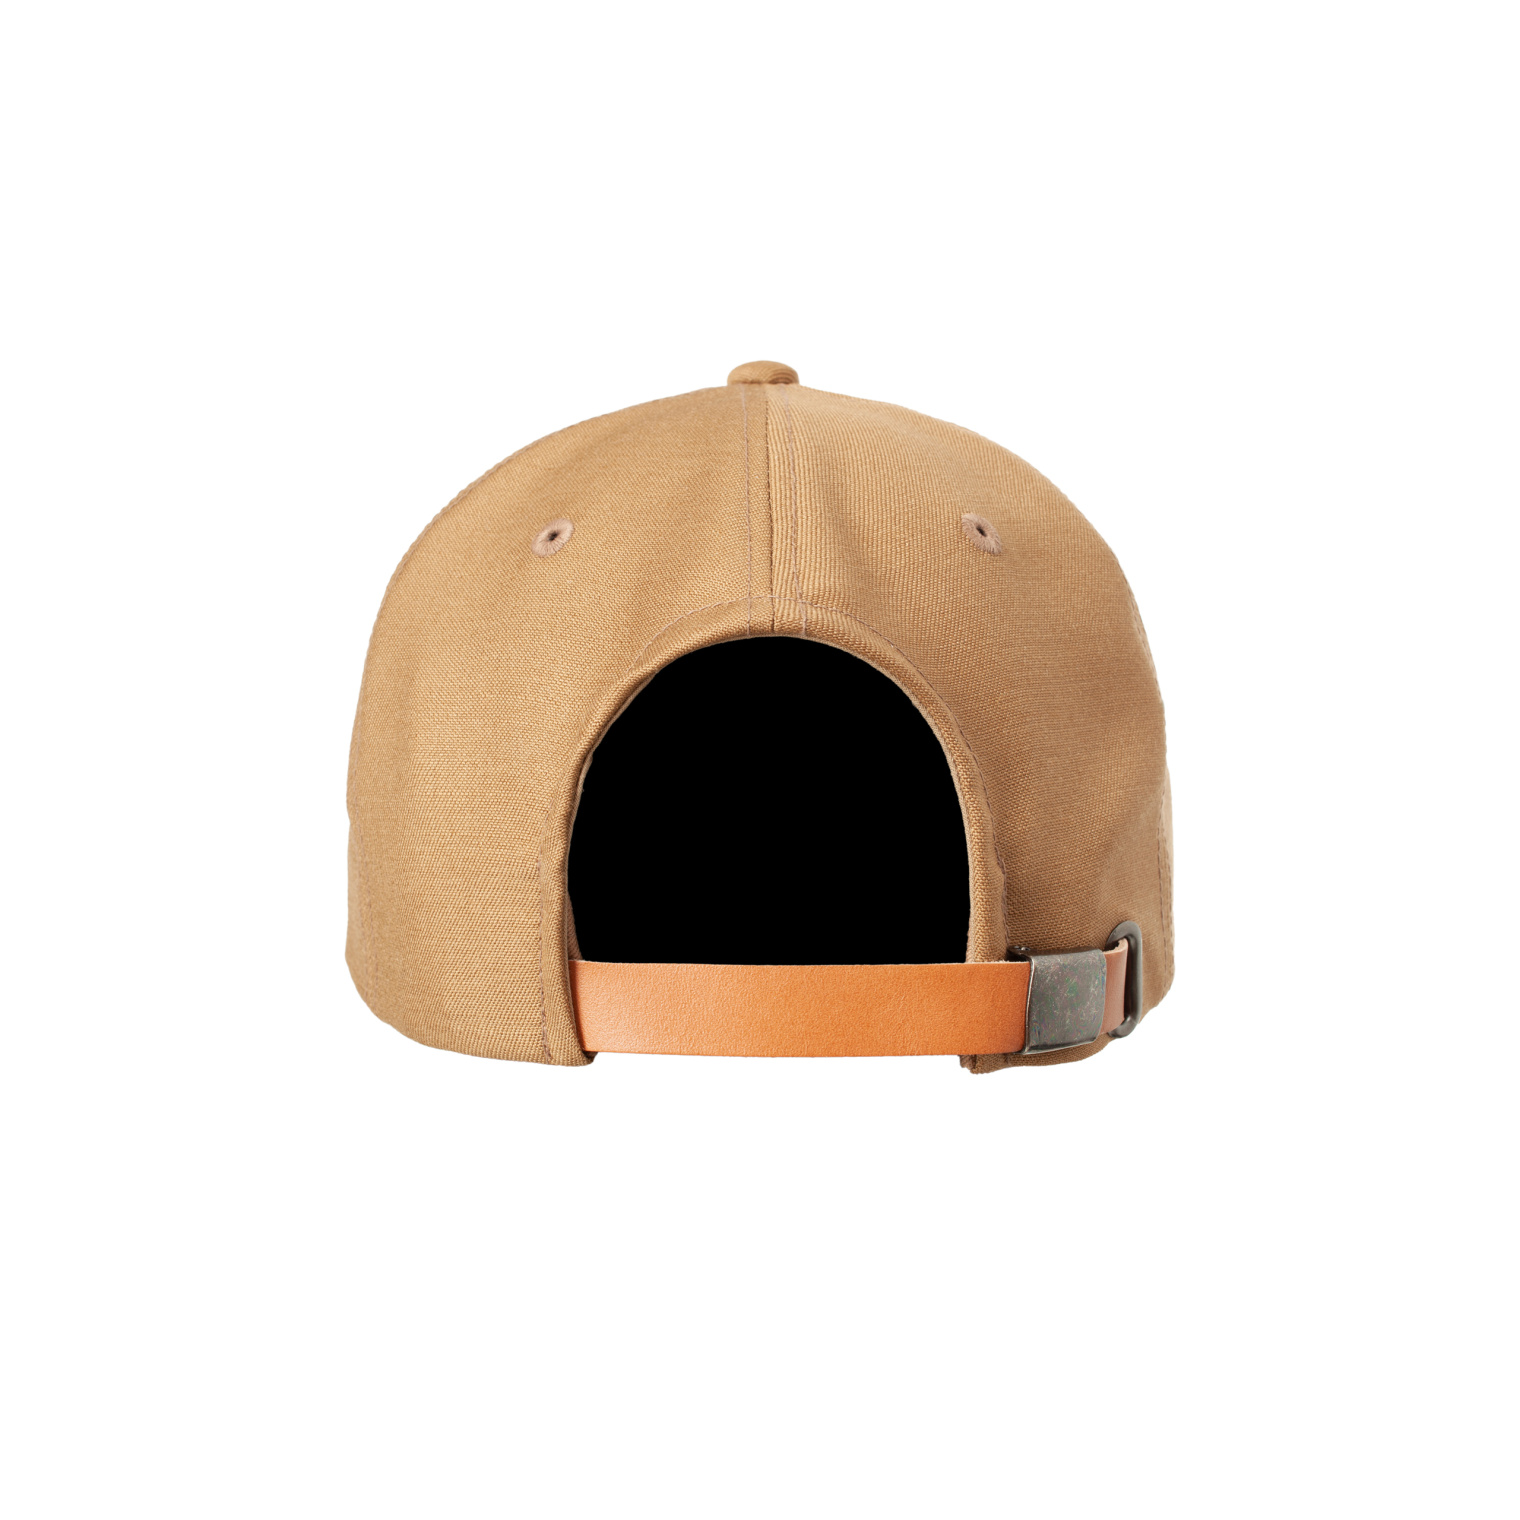 Undercover Beige embroidered baseball cap